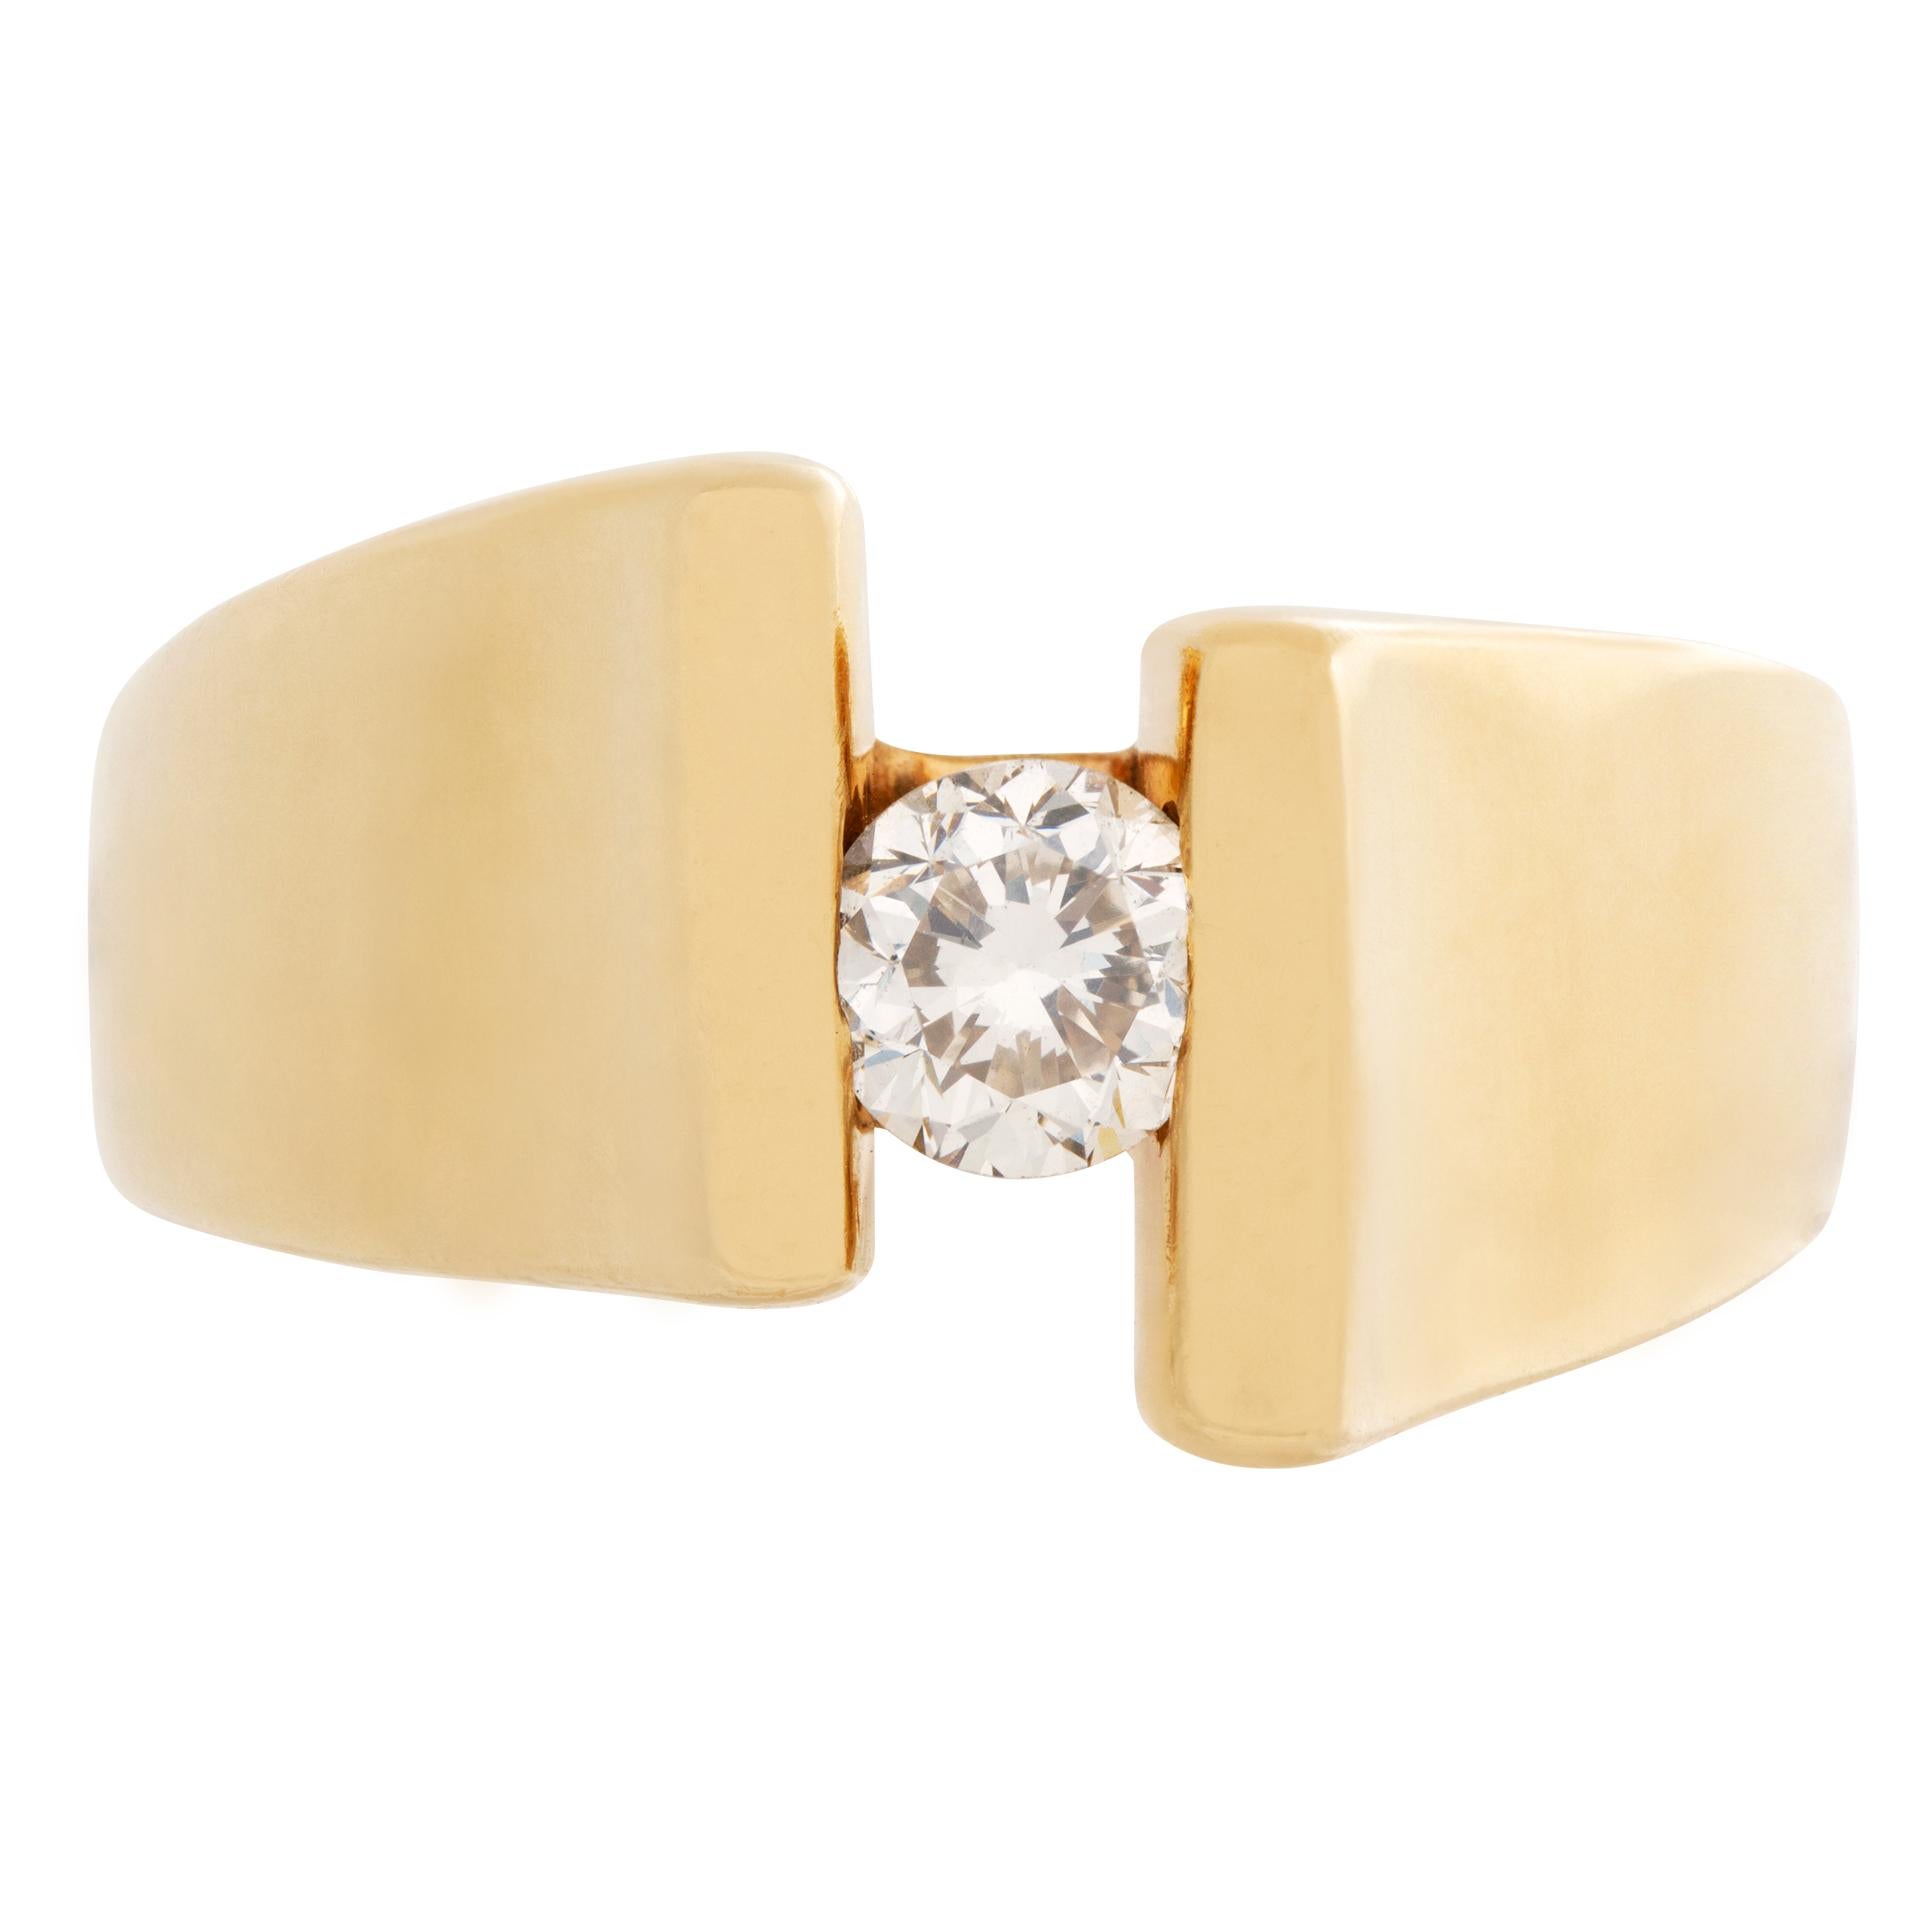 Modernist ring with 0.35 carat full cut round brilliant diamond center set in 14 k yellow gold. Estimate: G-H color, VS-SI clarity. Size 8.5

This Diamond ring is currently size 8.5 and some items can be sized up or down, please ask! It weighs 5.7